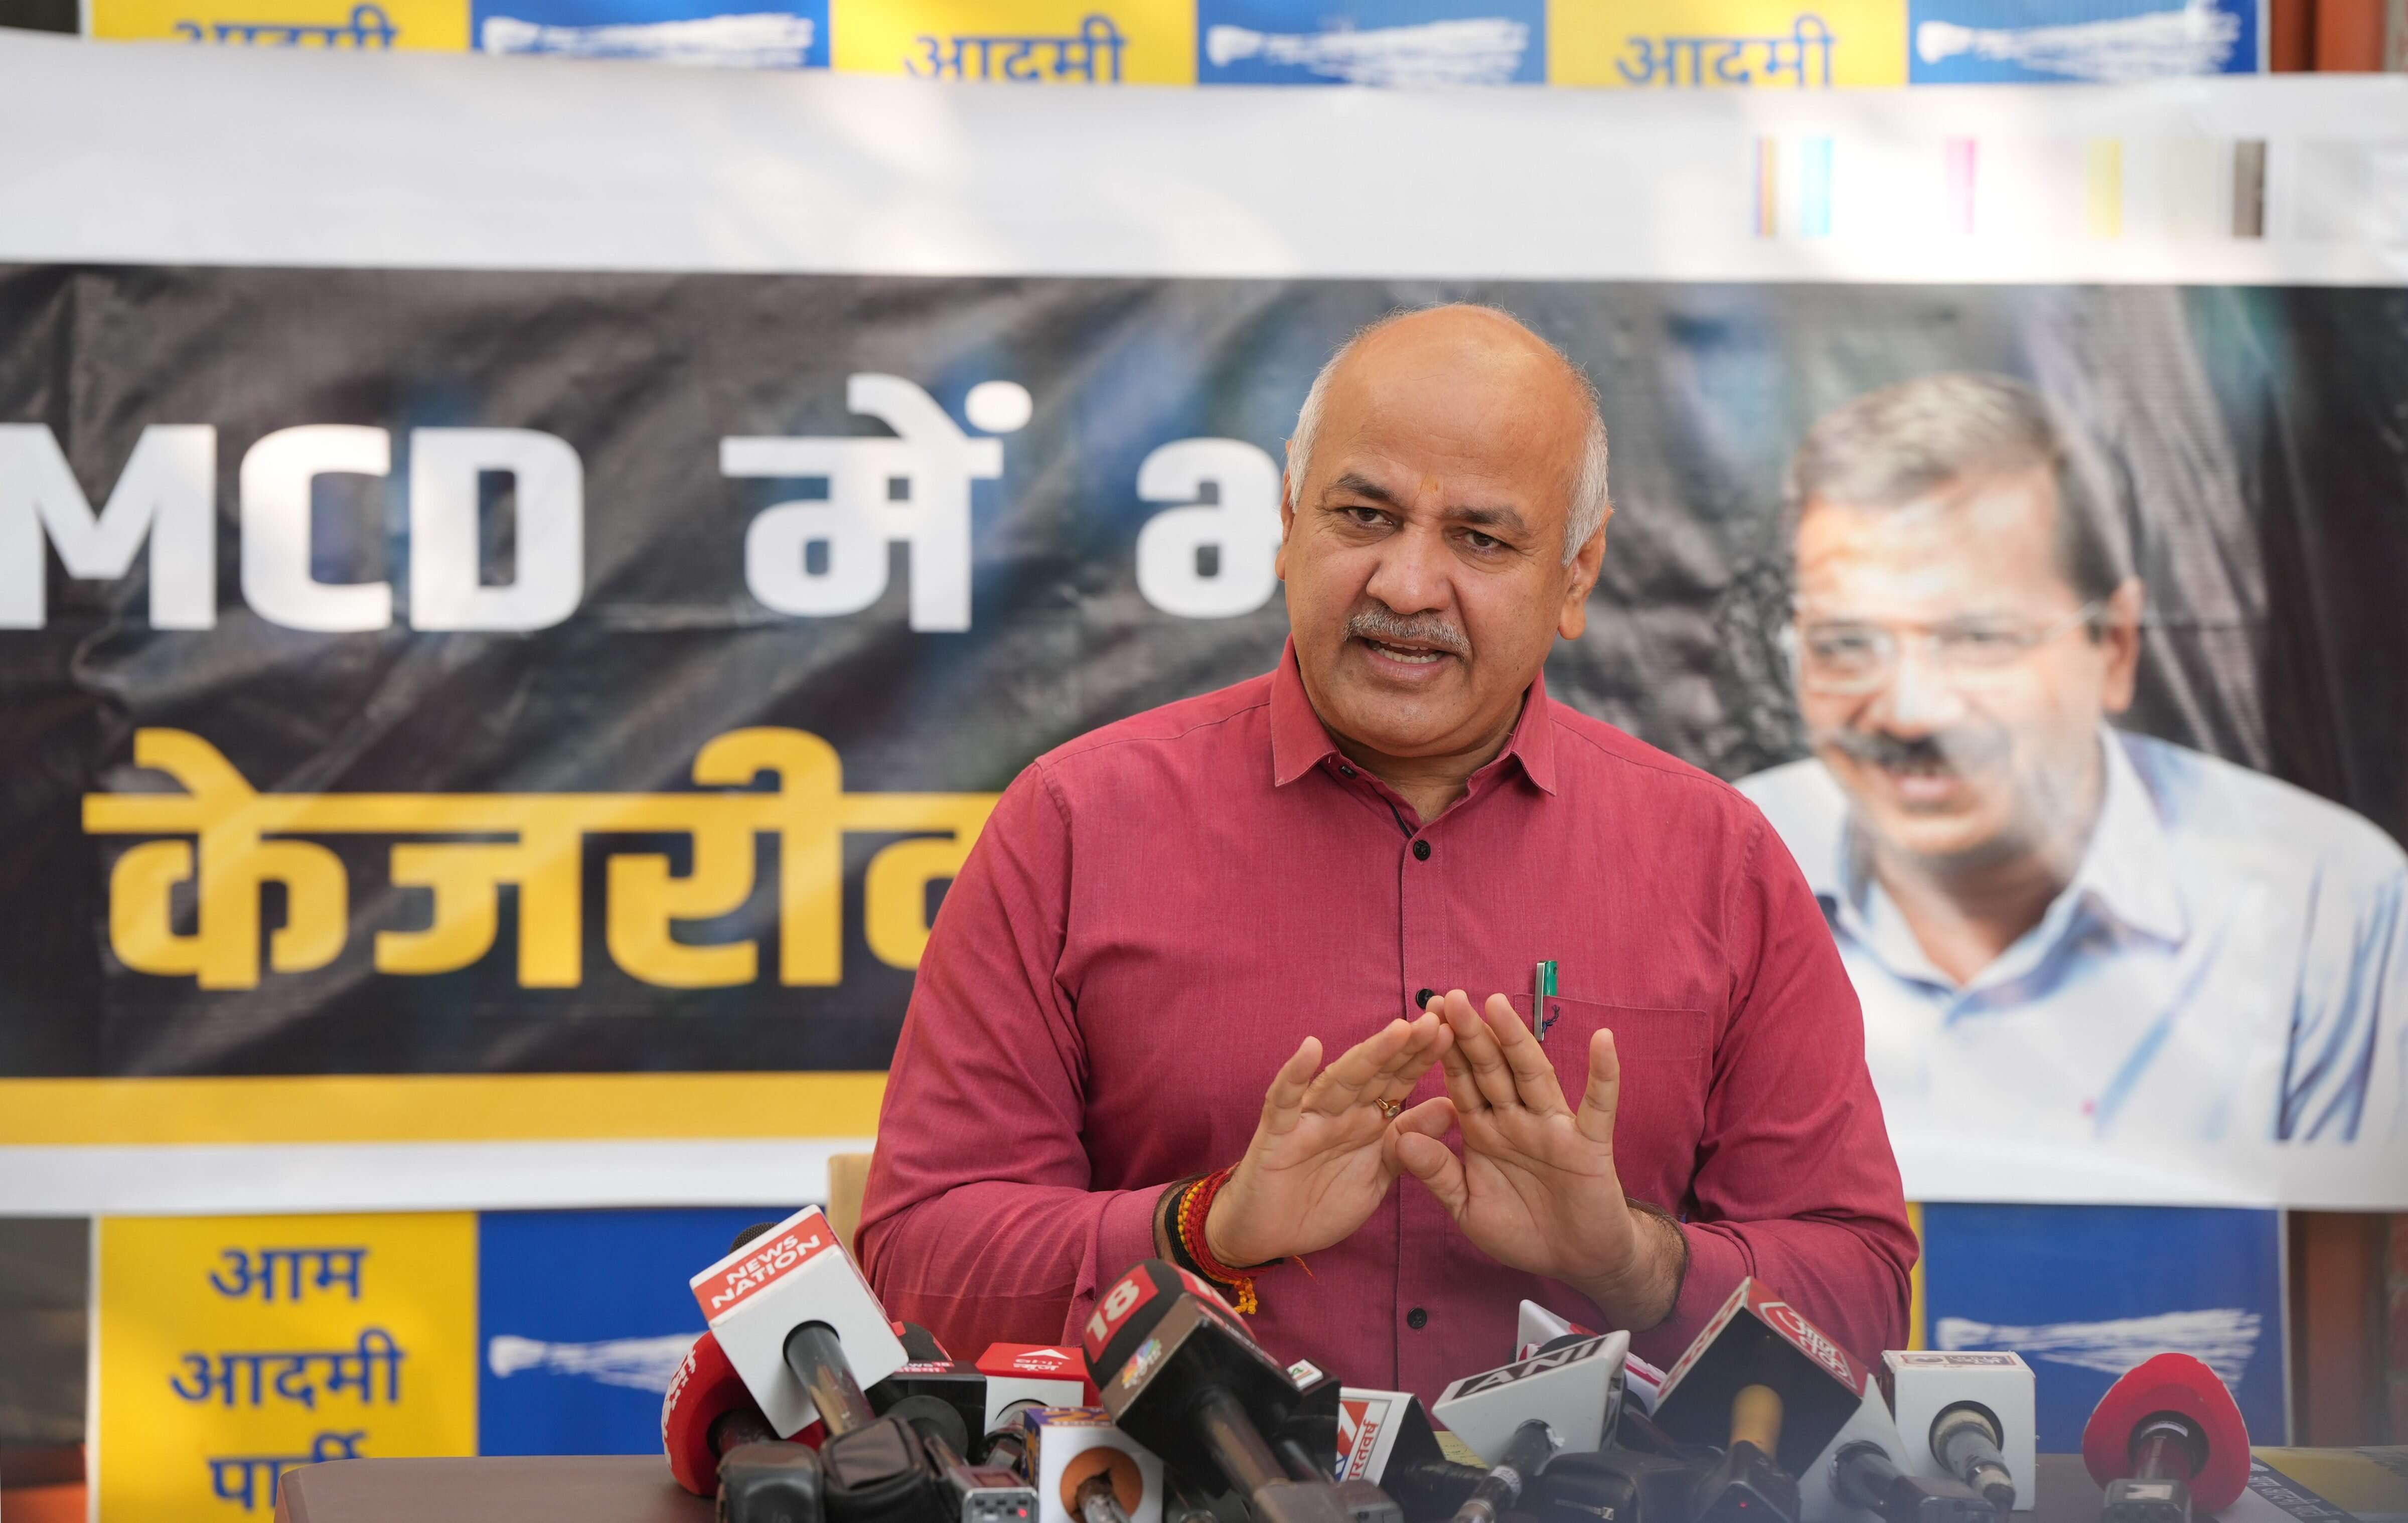 BJP hatching a conspiracy to assassinate Kejriwal, alleges Delhi Dy CM Sisodia; demands probe